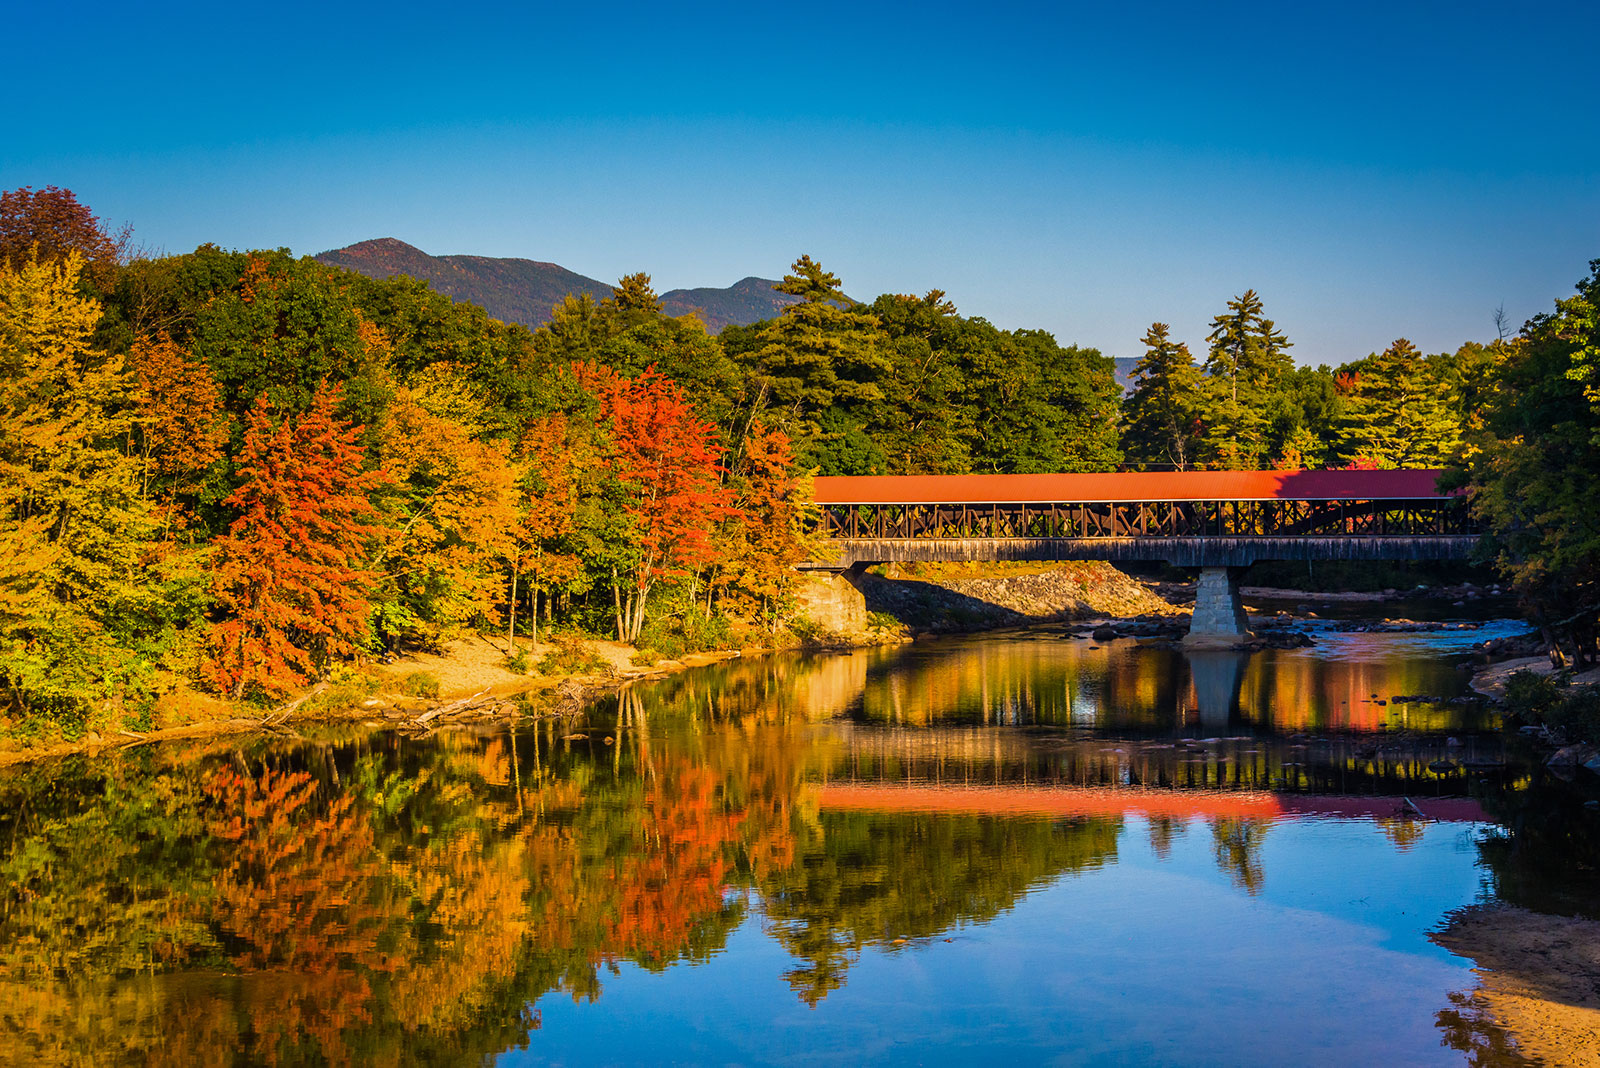 Looking across the Saco River in Fall at a covered bridge